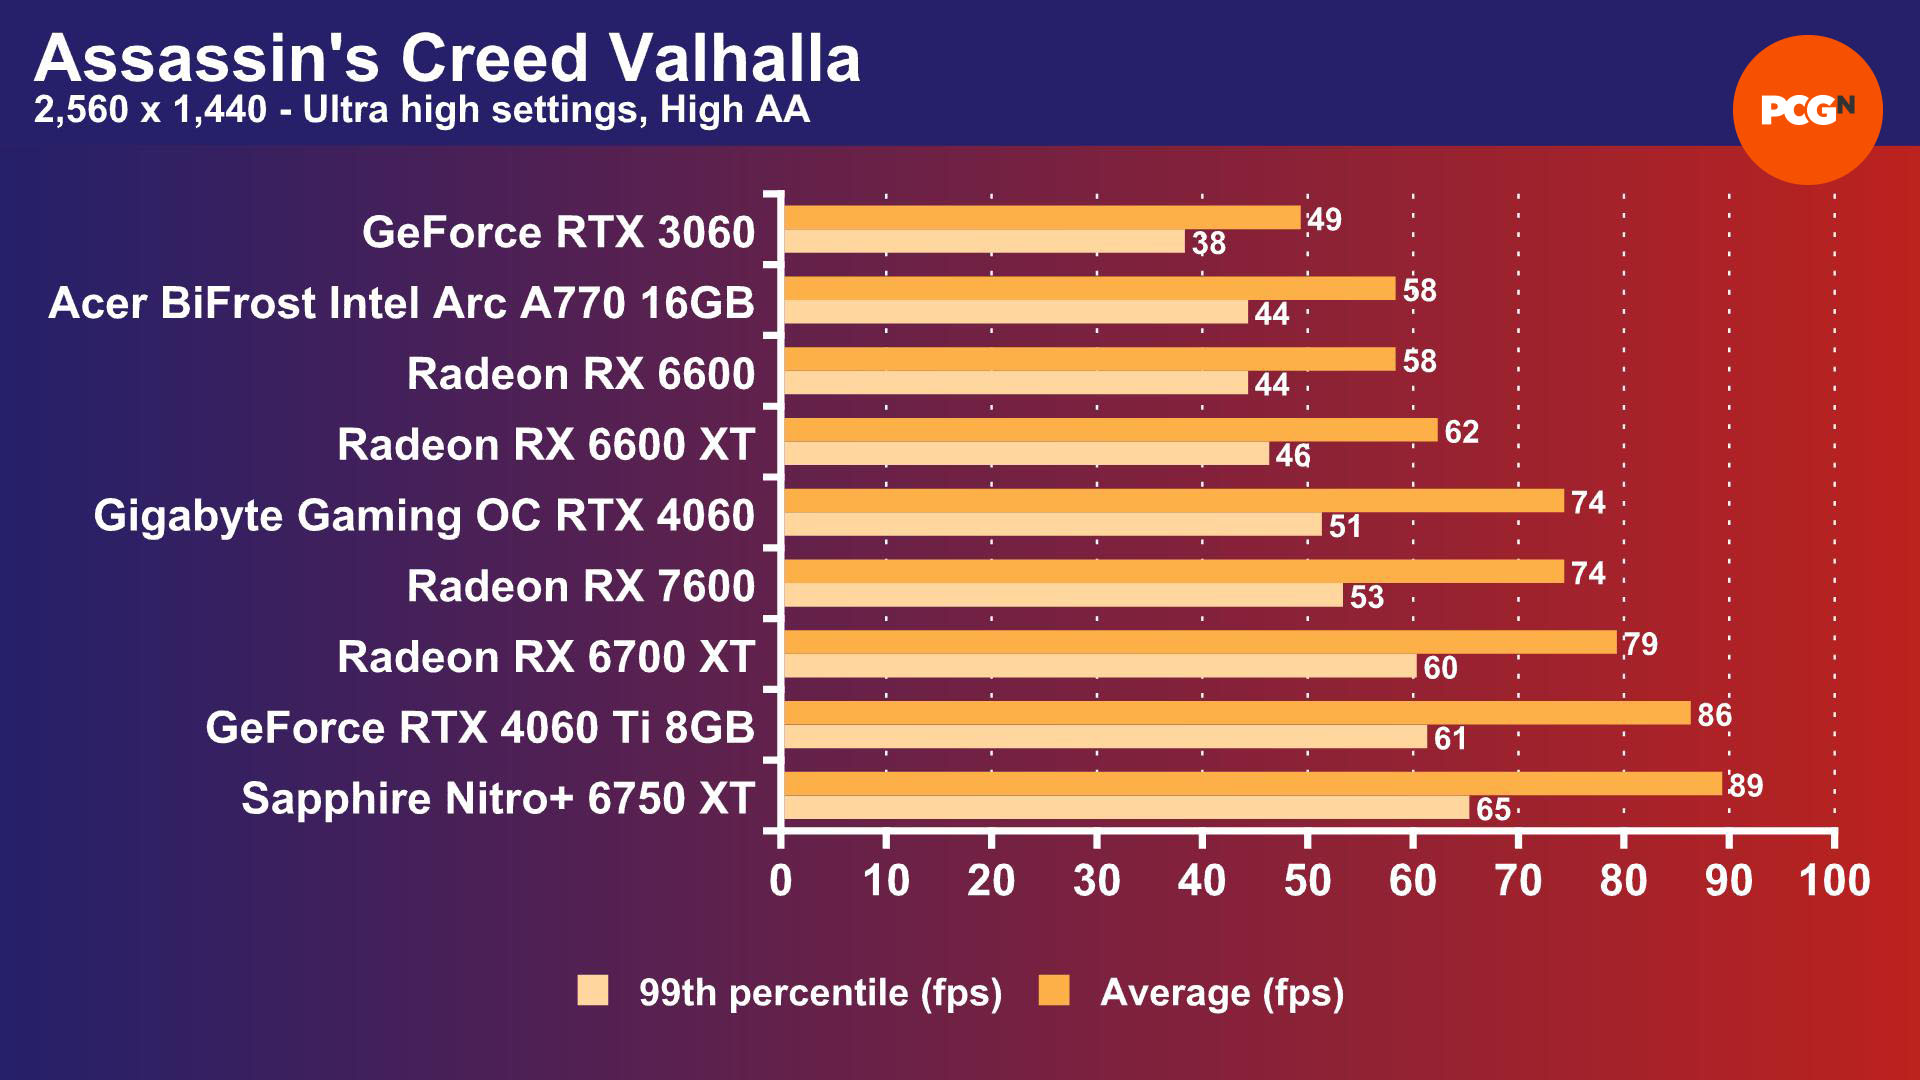 Intel Arc A770 review: Assassins Creed Valhalla 2,560 x 1,440 benchmark results graph